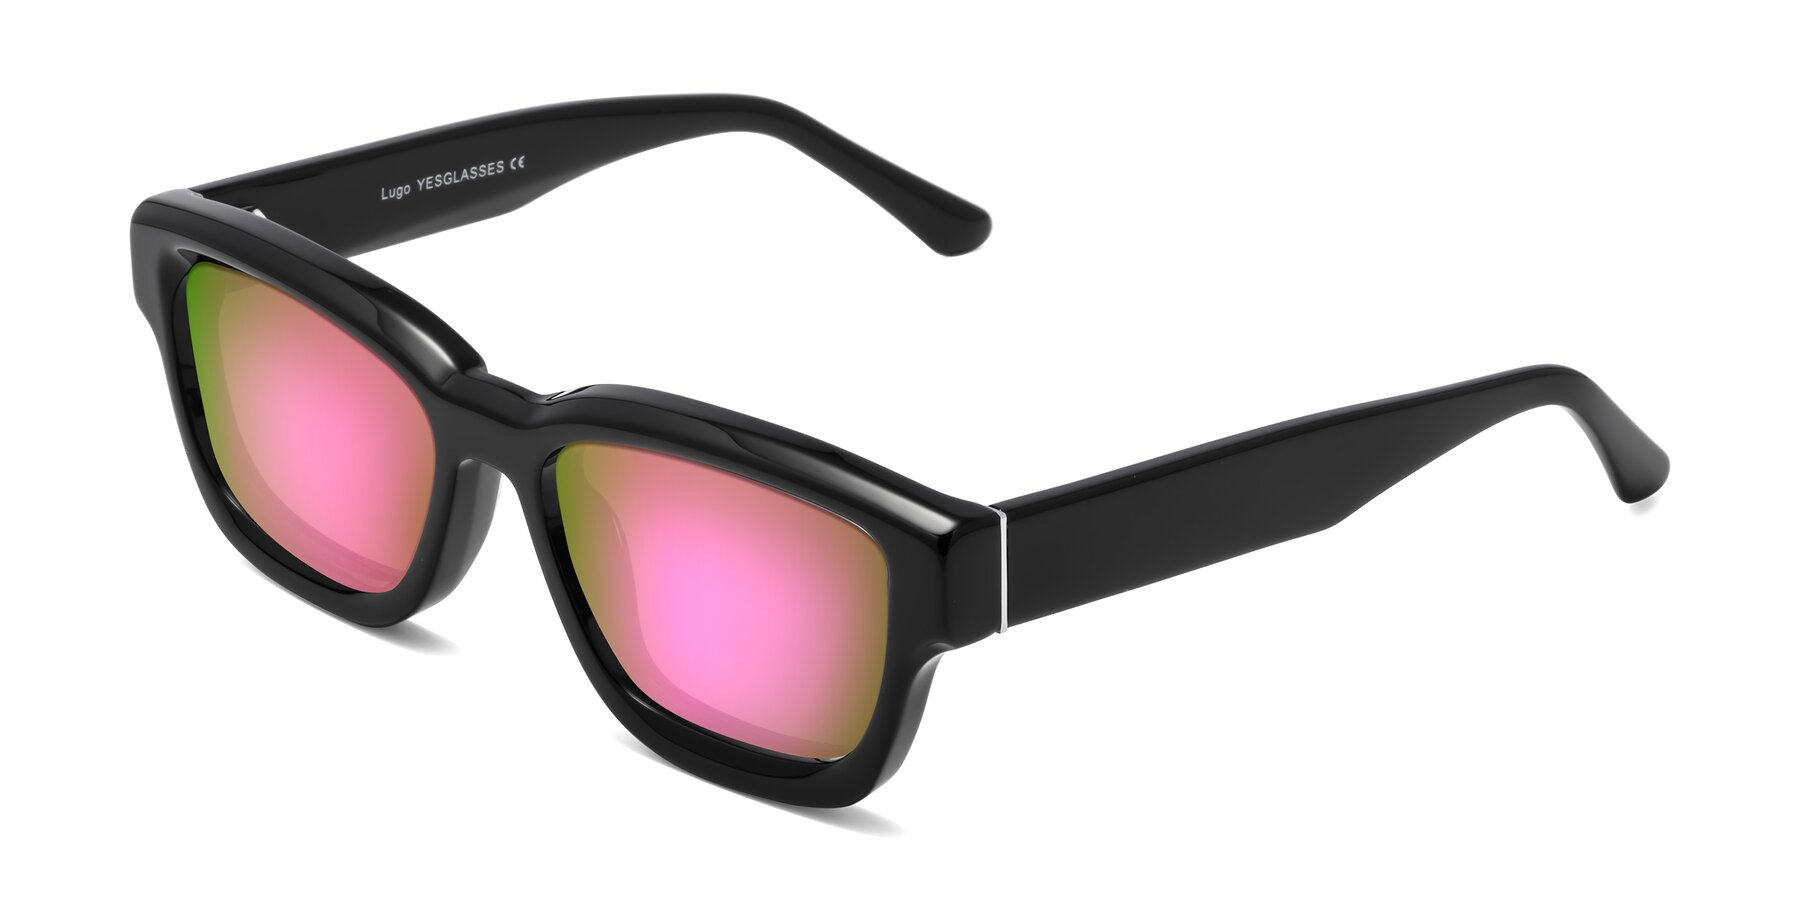 Angle of Lugo in Black with Pink Mirrored Lenses